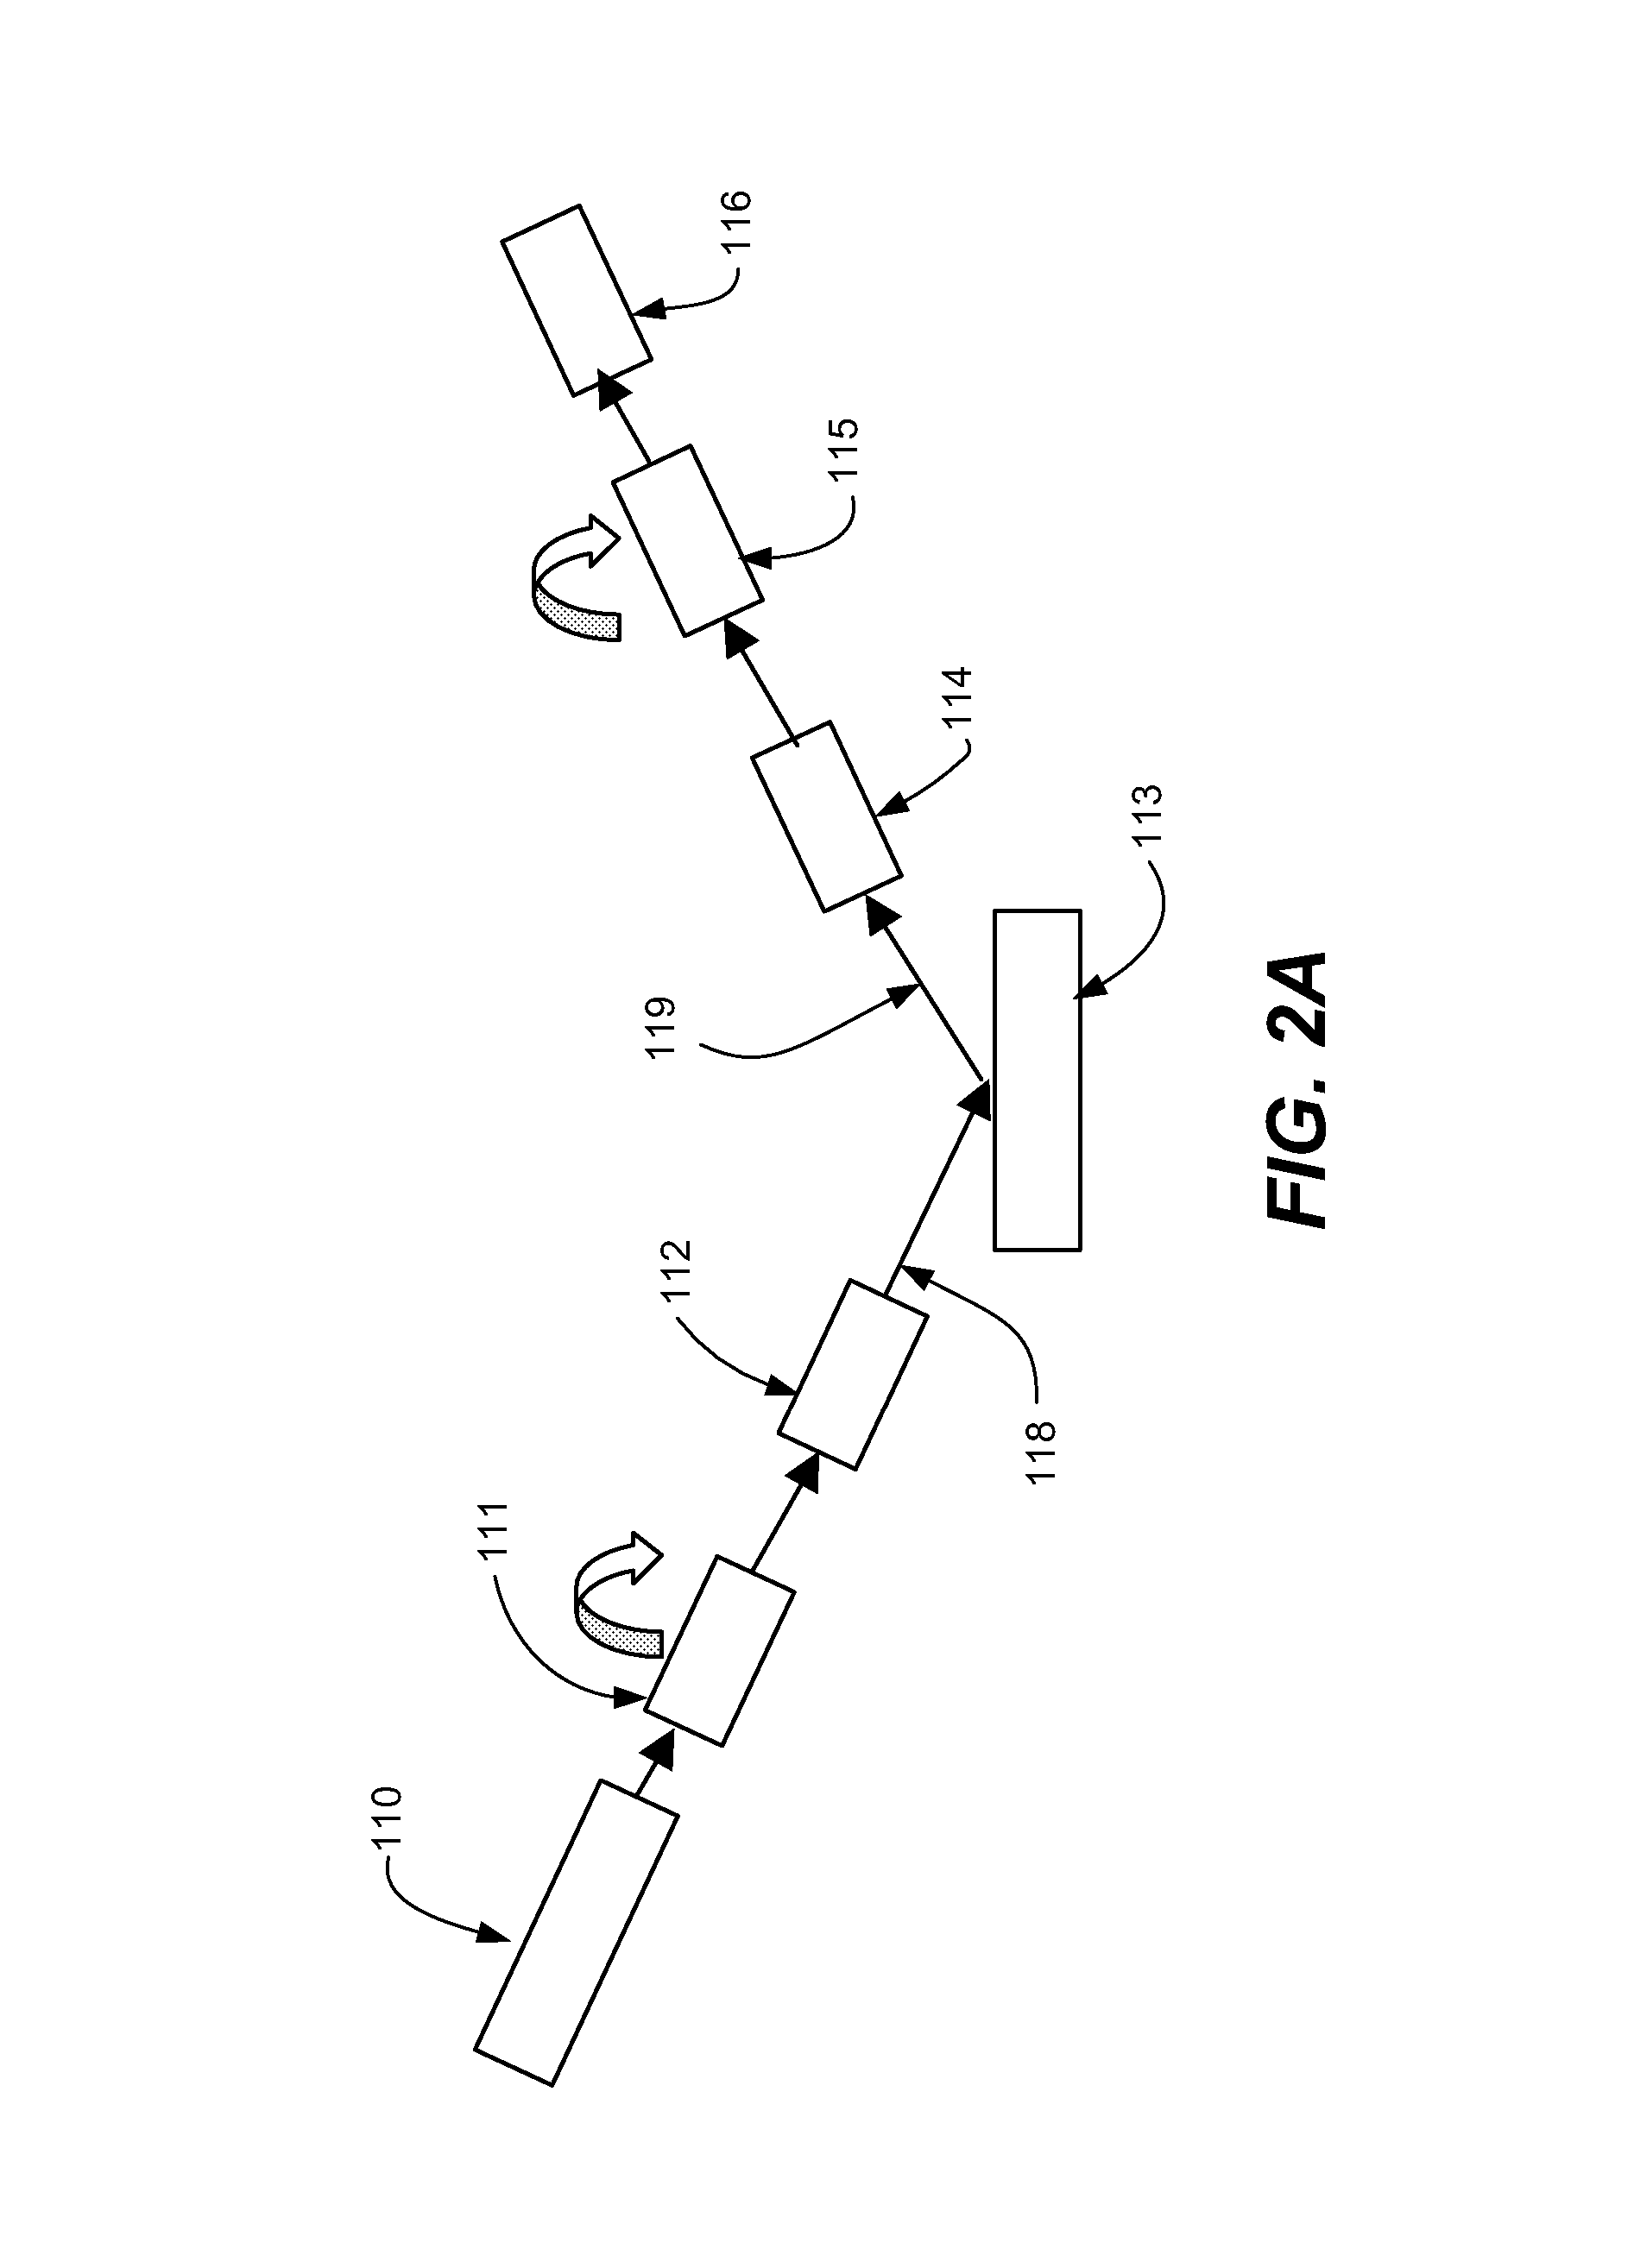 Measuring overlay and profile asymmetry using symmetric and anti-symmetric scatterometry signals